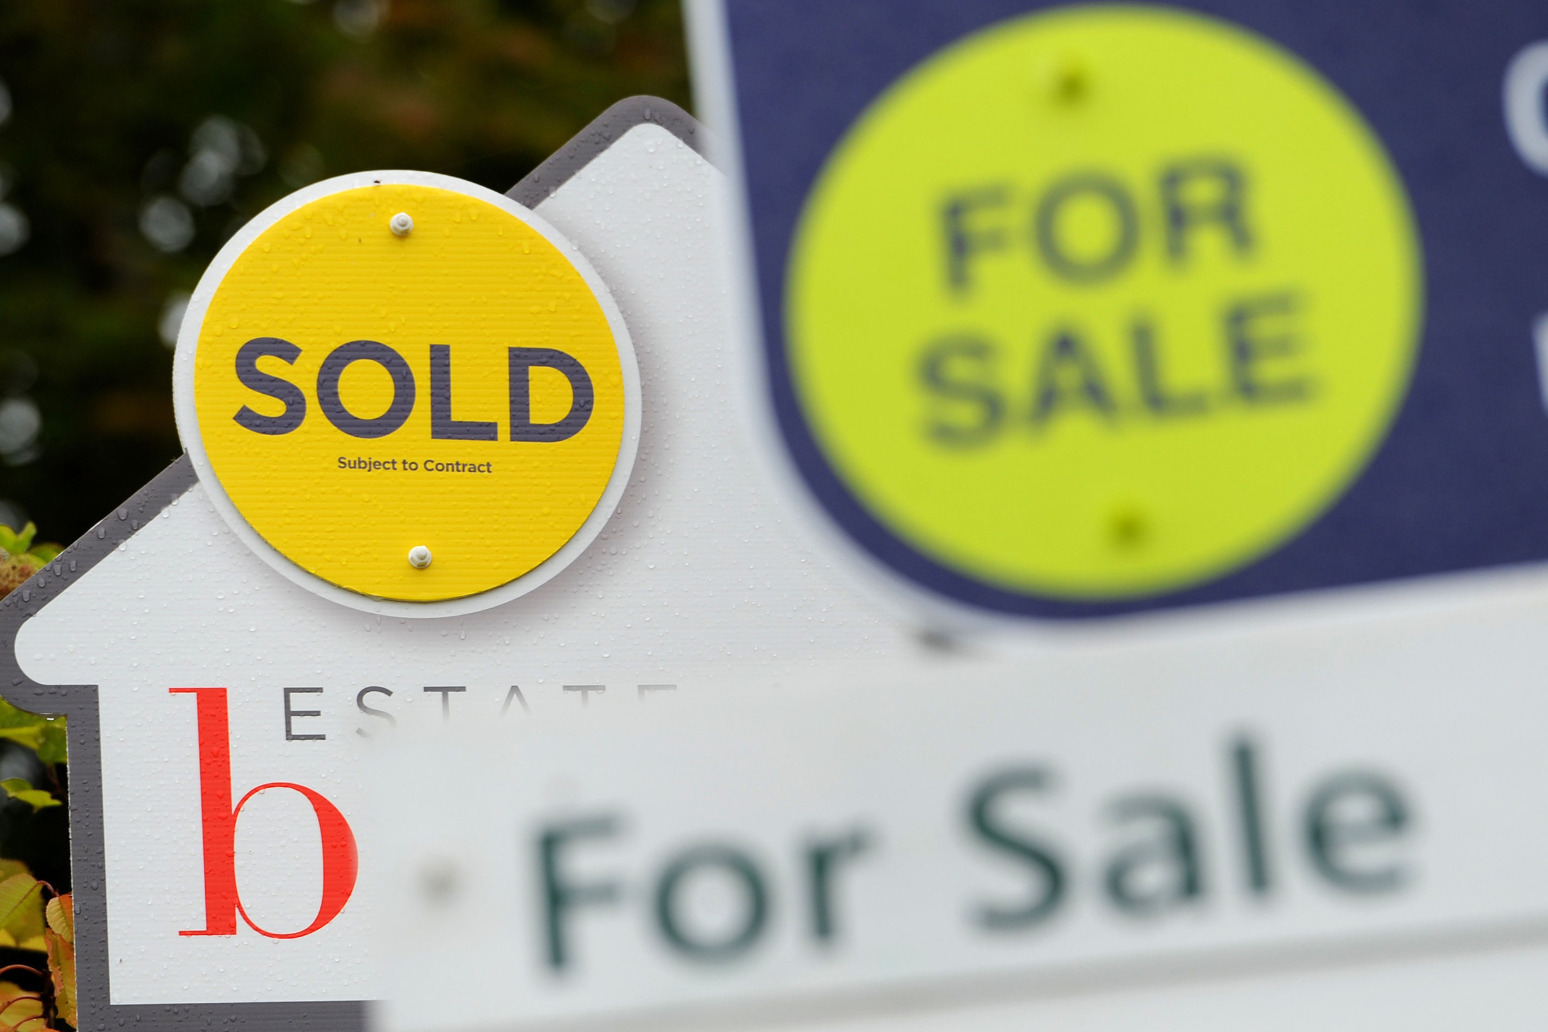 Number of house sales this year ‘on track to be lowest since 2012’ 